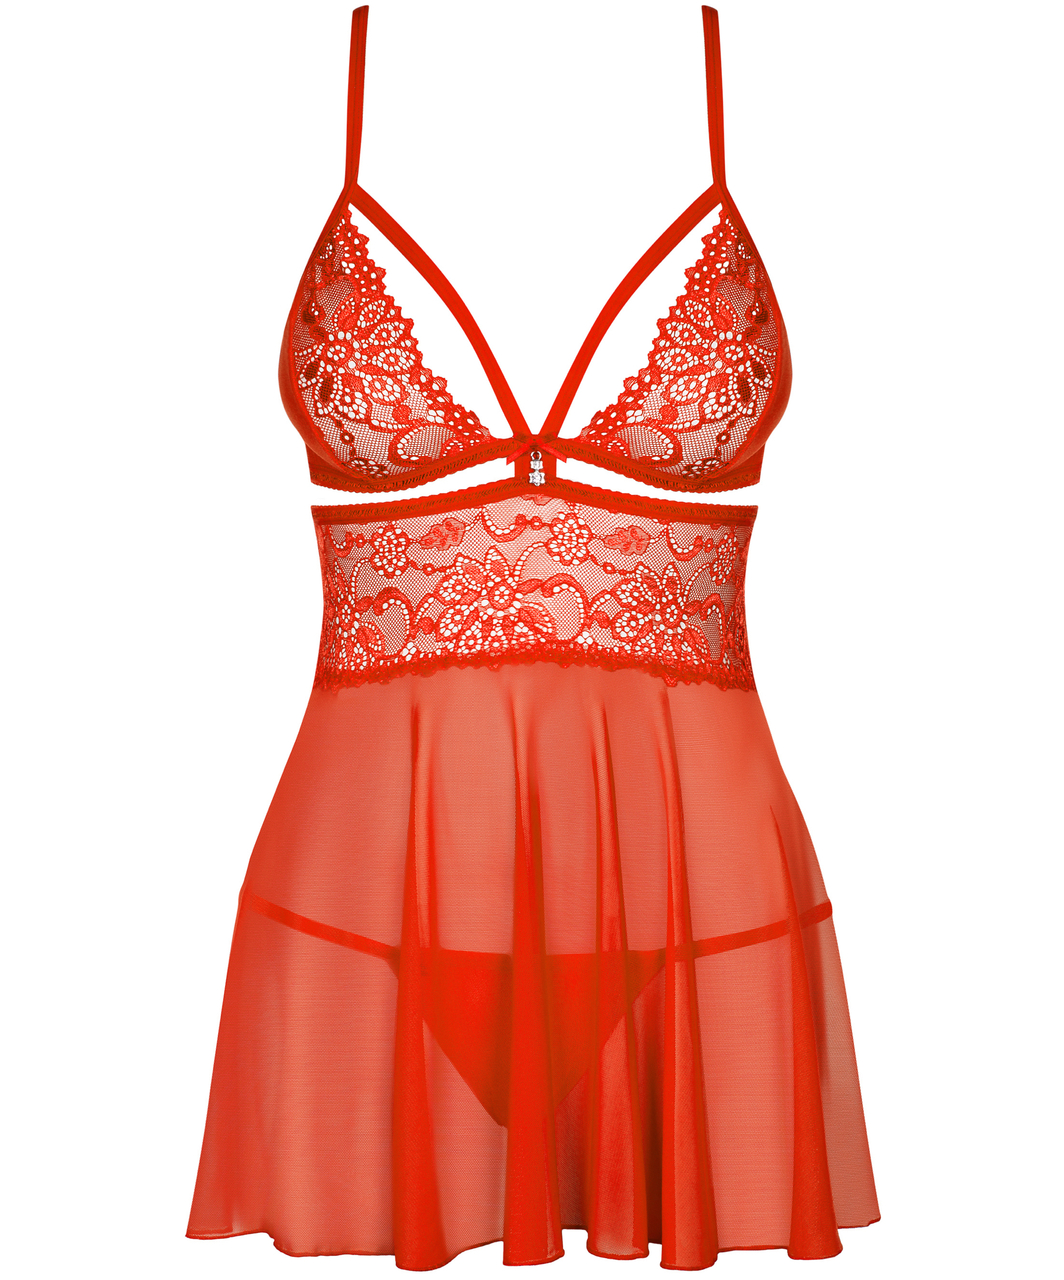 Obsessive red sheer babydoll with lace